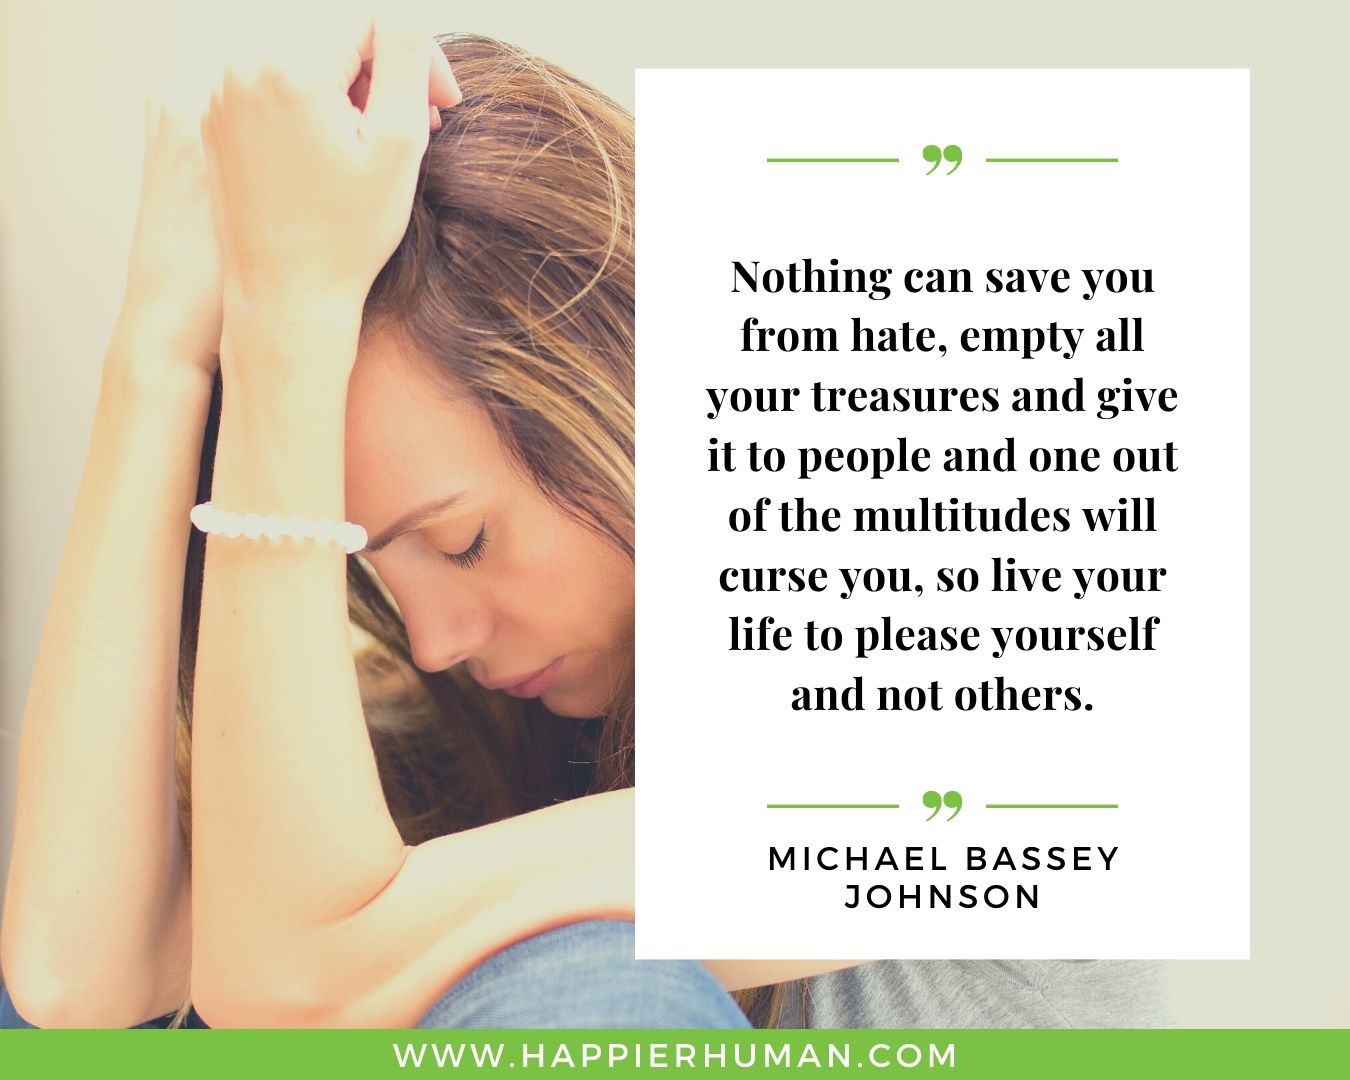 Haters Quotes - “Nothing can save you from hate, empty all your treasures and give it to people and one out of the multitudes will curse you, so live your life to please yourself and not others.” - Michael Bassey Johnson